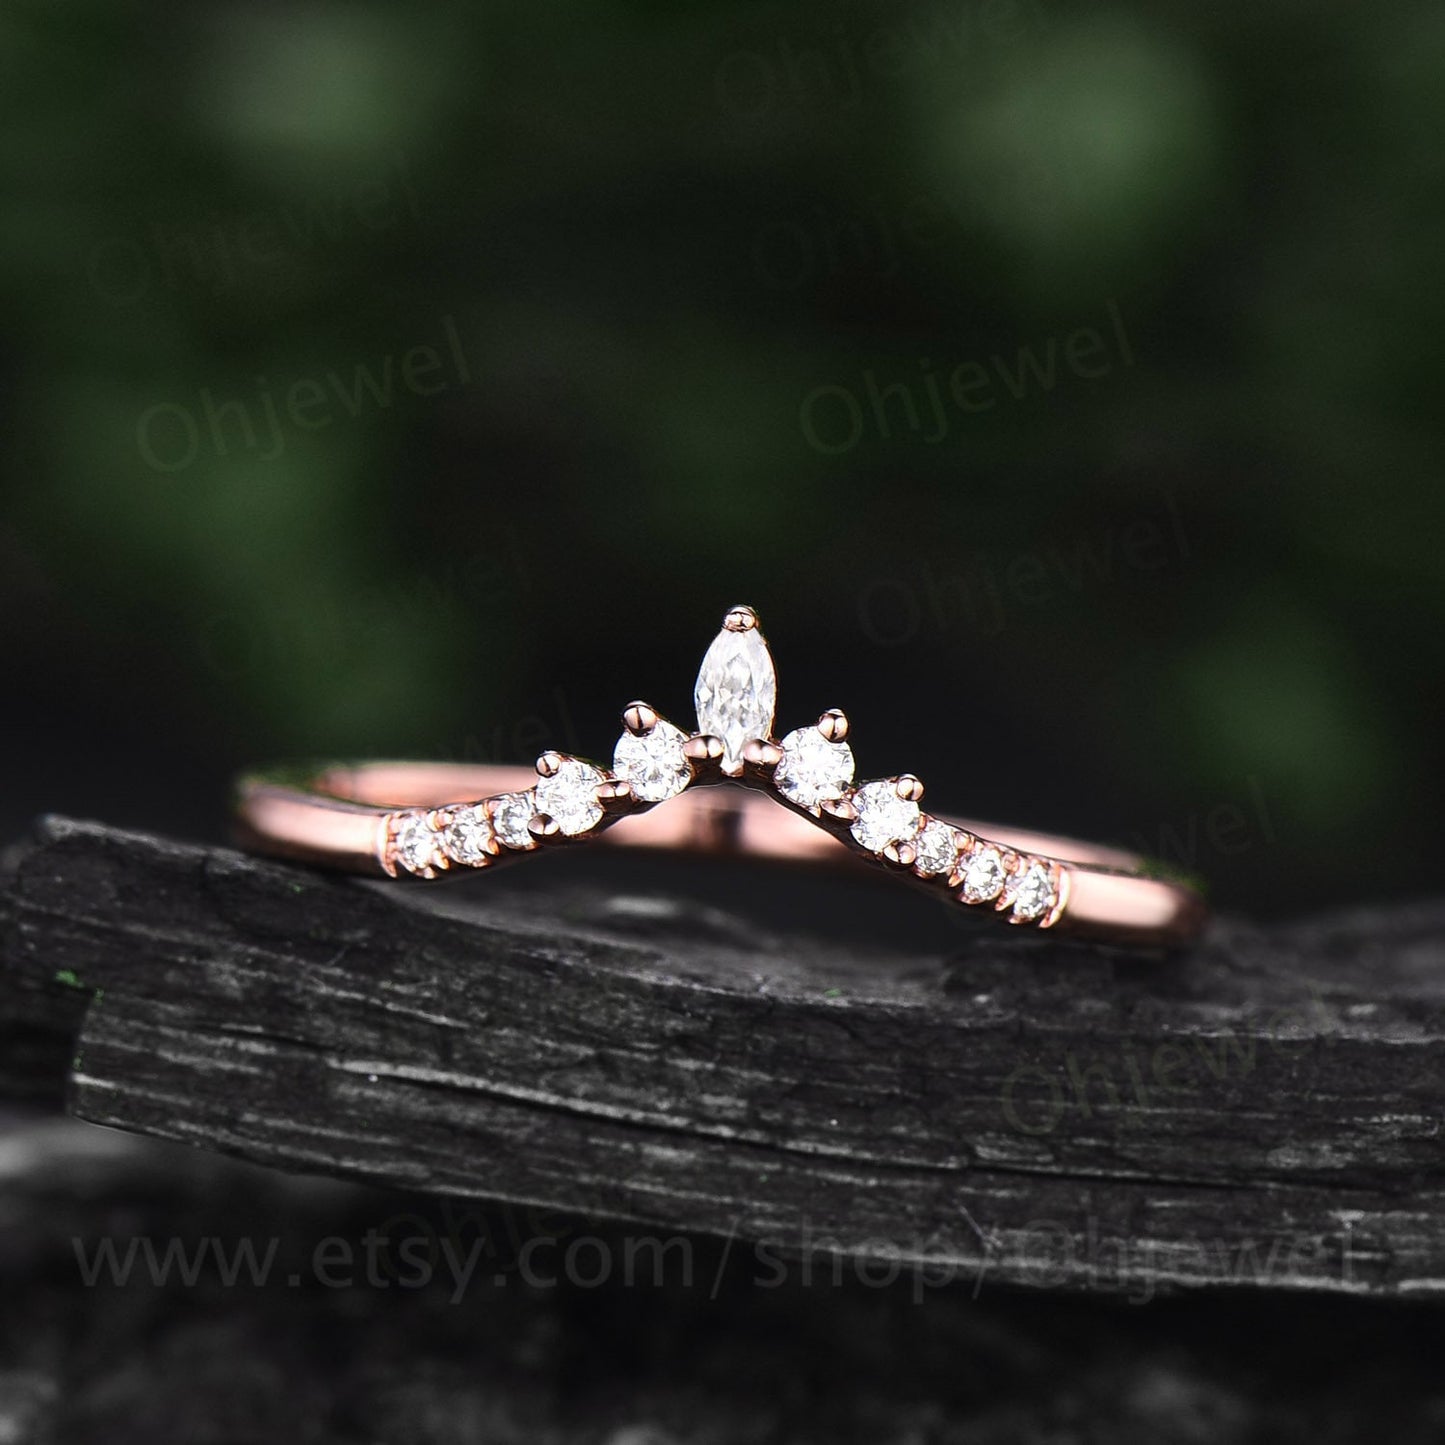 Art deco diamond wedding band 14k rose gold marquise cut moissanite wedding ring band dainty ring unique bridal anniversary ring for women